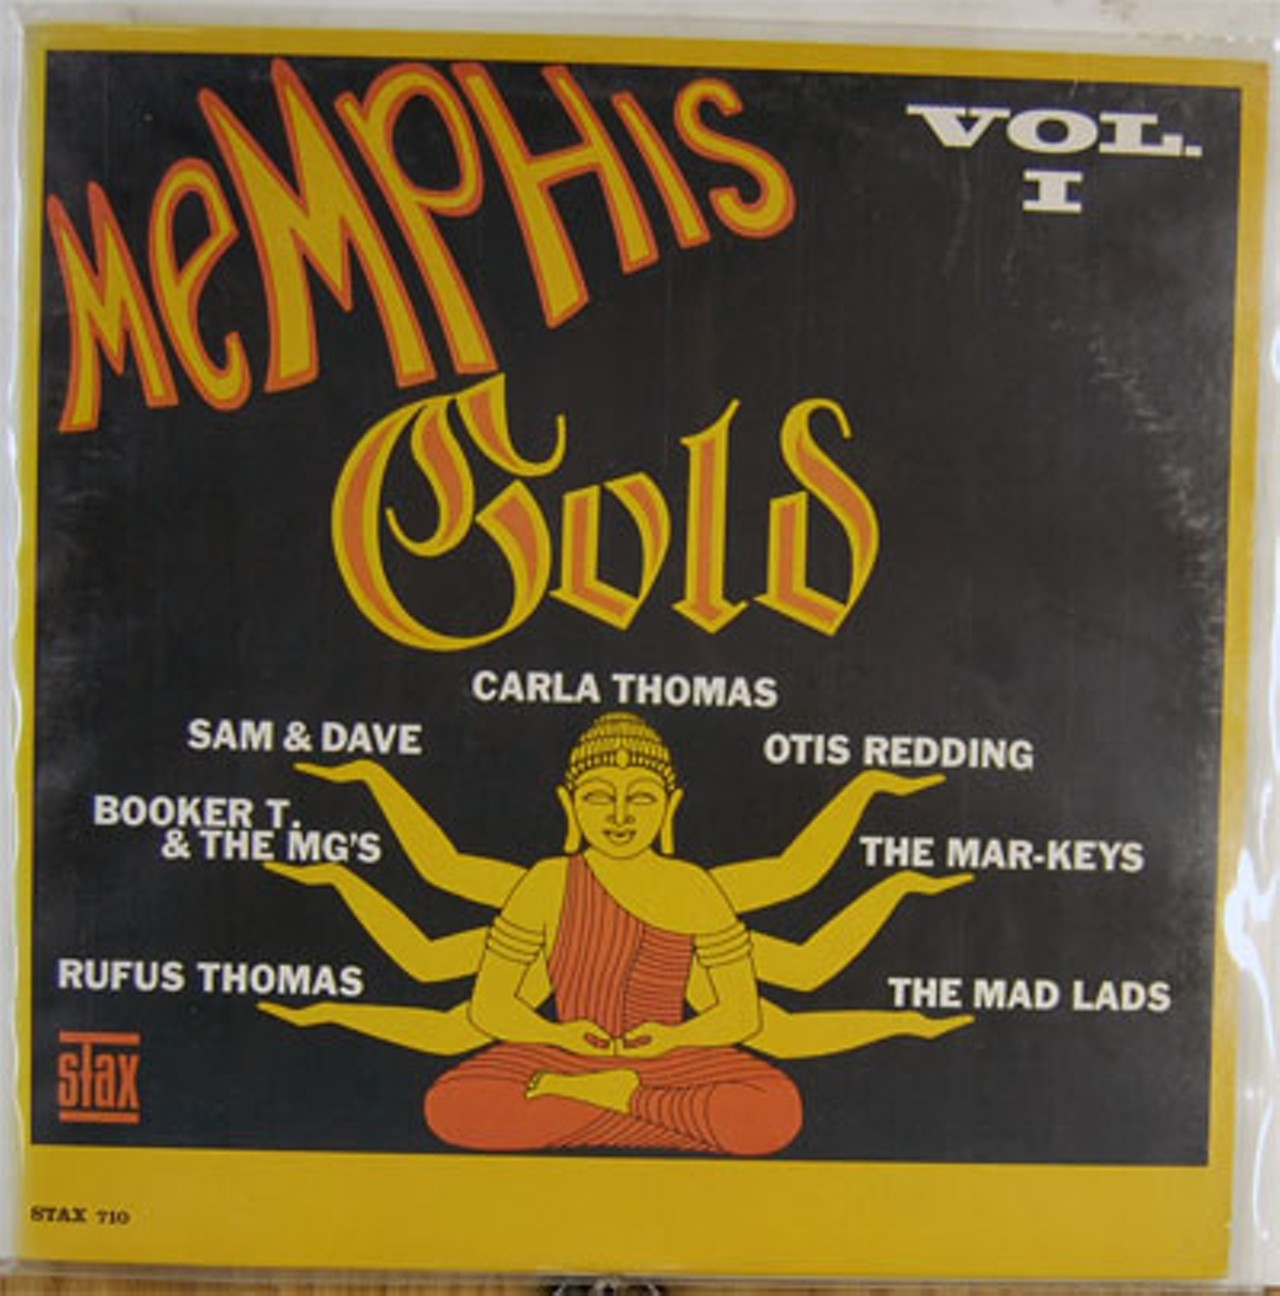 Memphis Gold, Volume I, carries a Hindu influence. It was the first in a series of Stax compilations.Read "Voices Carry: Shirley Brown, the forgotten soul sister, sings on," by Roy Kasten.